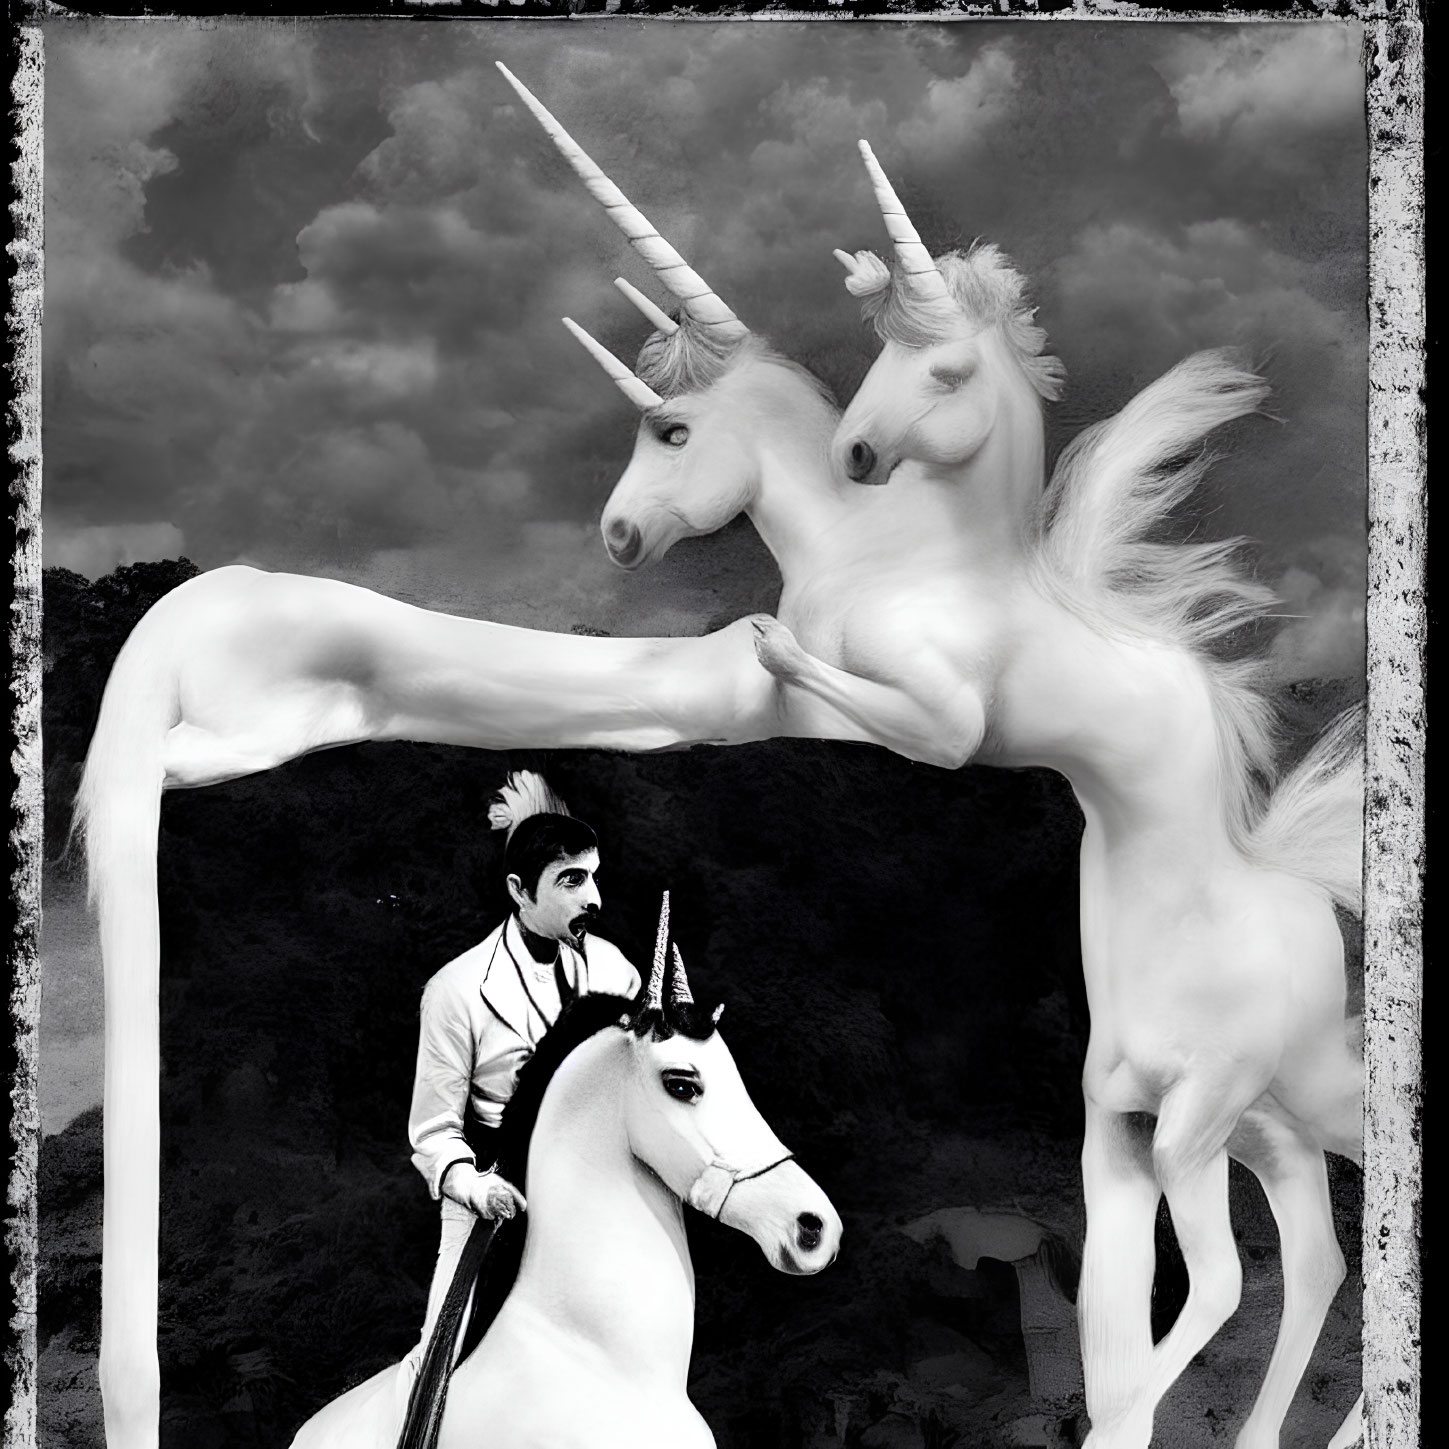 Surreal black and white image of person with unicorn horn riding unicorn